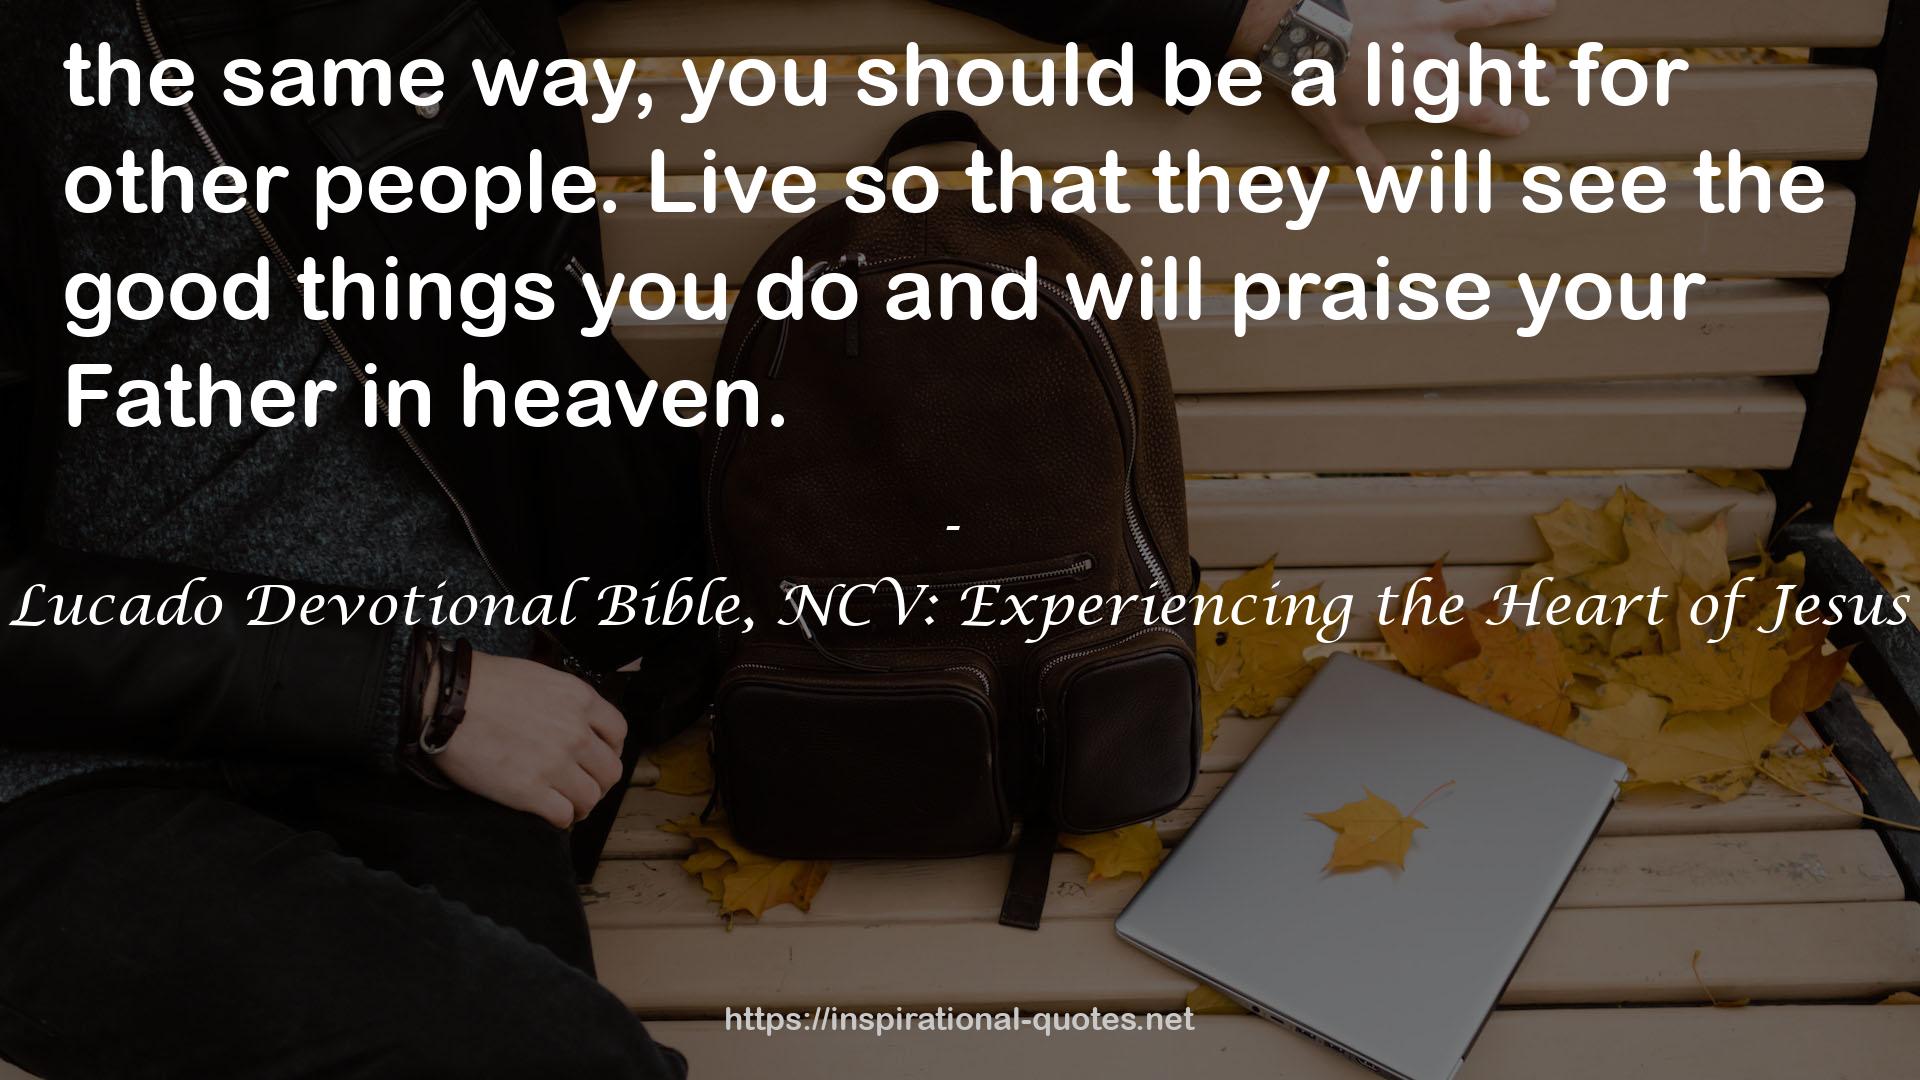 Lucado Devotional Bible, NCV: Experiencing the Heart of Jesus QUOTES